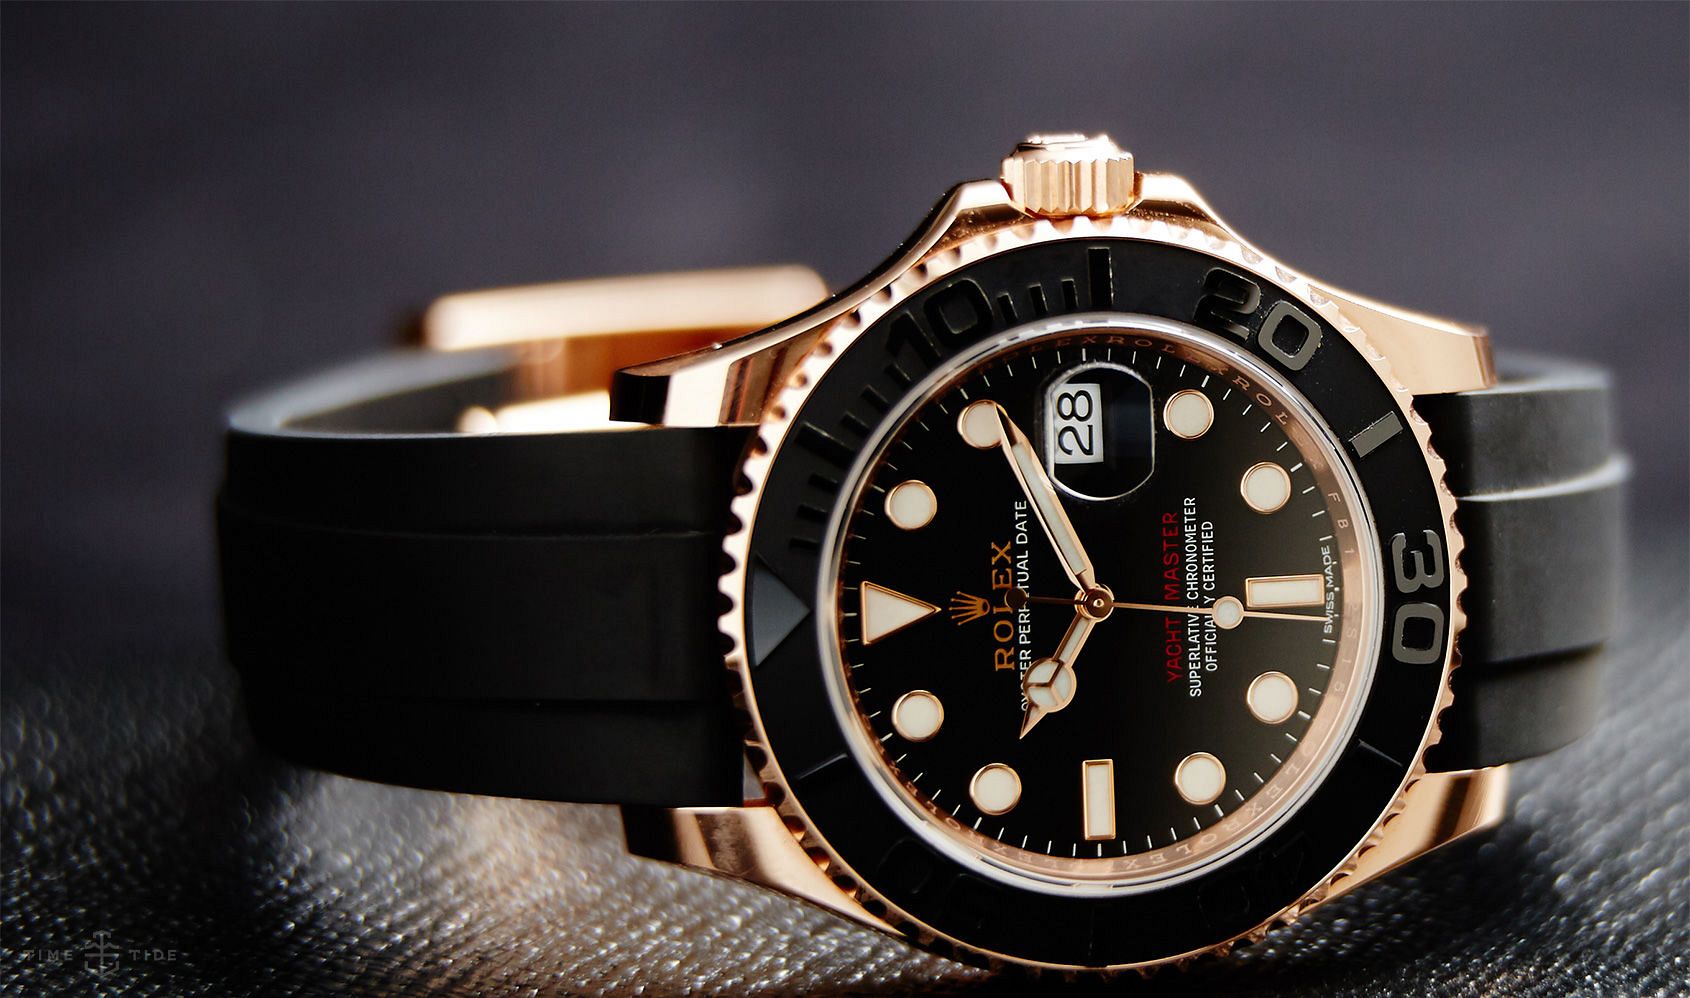 Rolex Yacht-Master 116655 In-depth Review